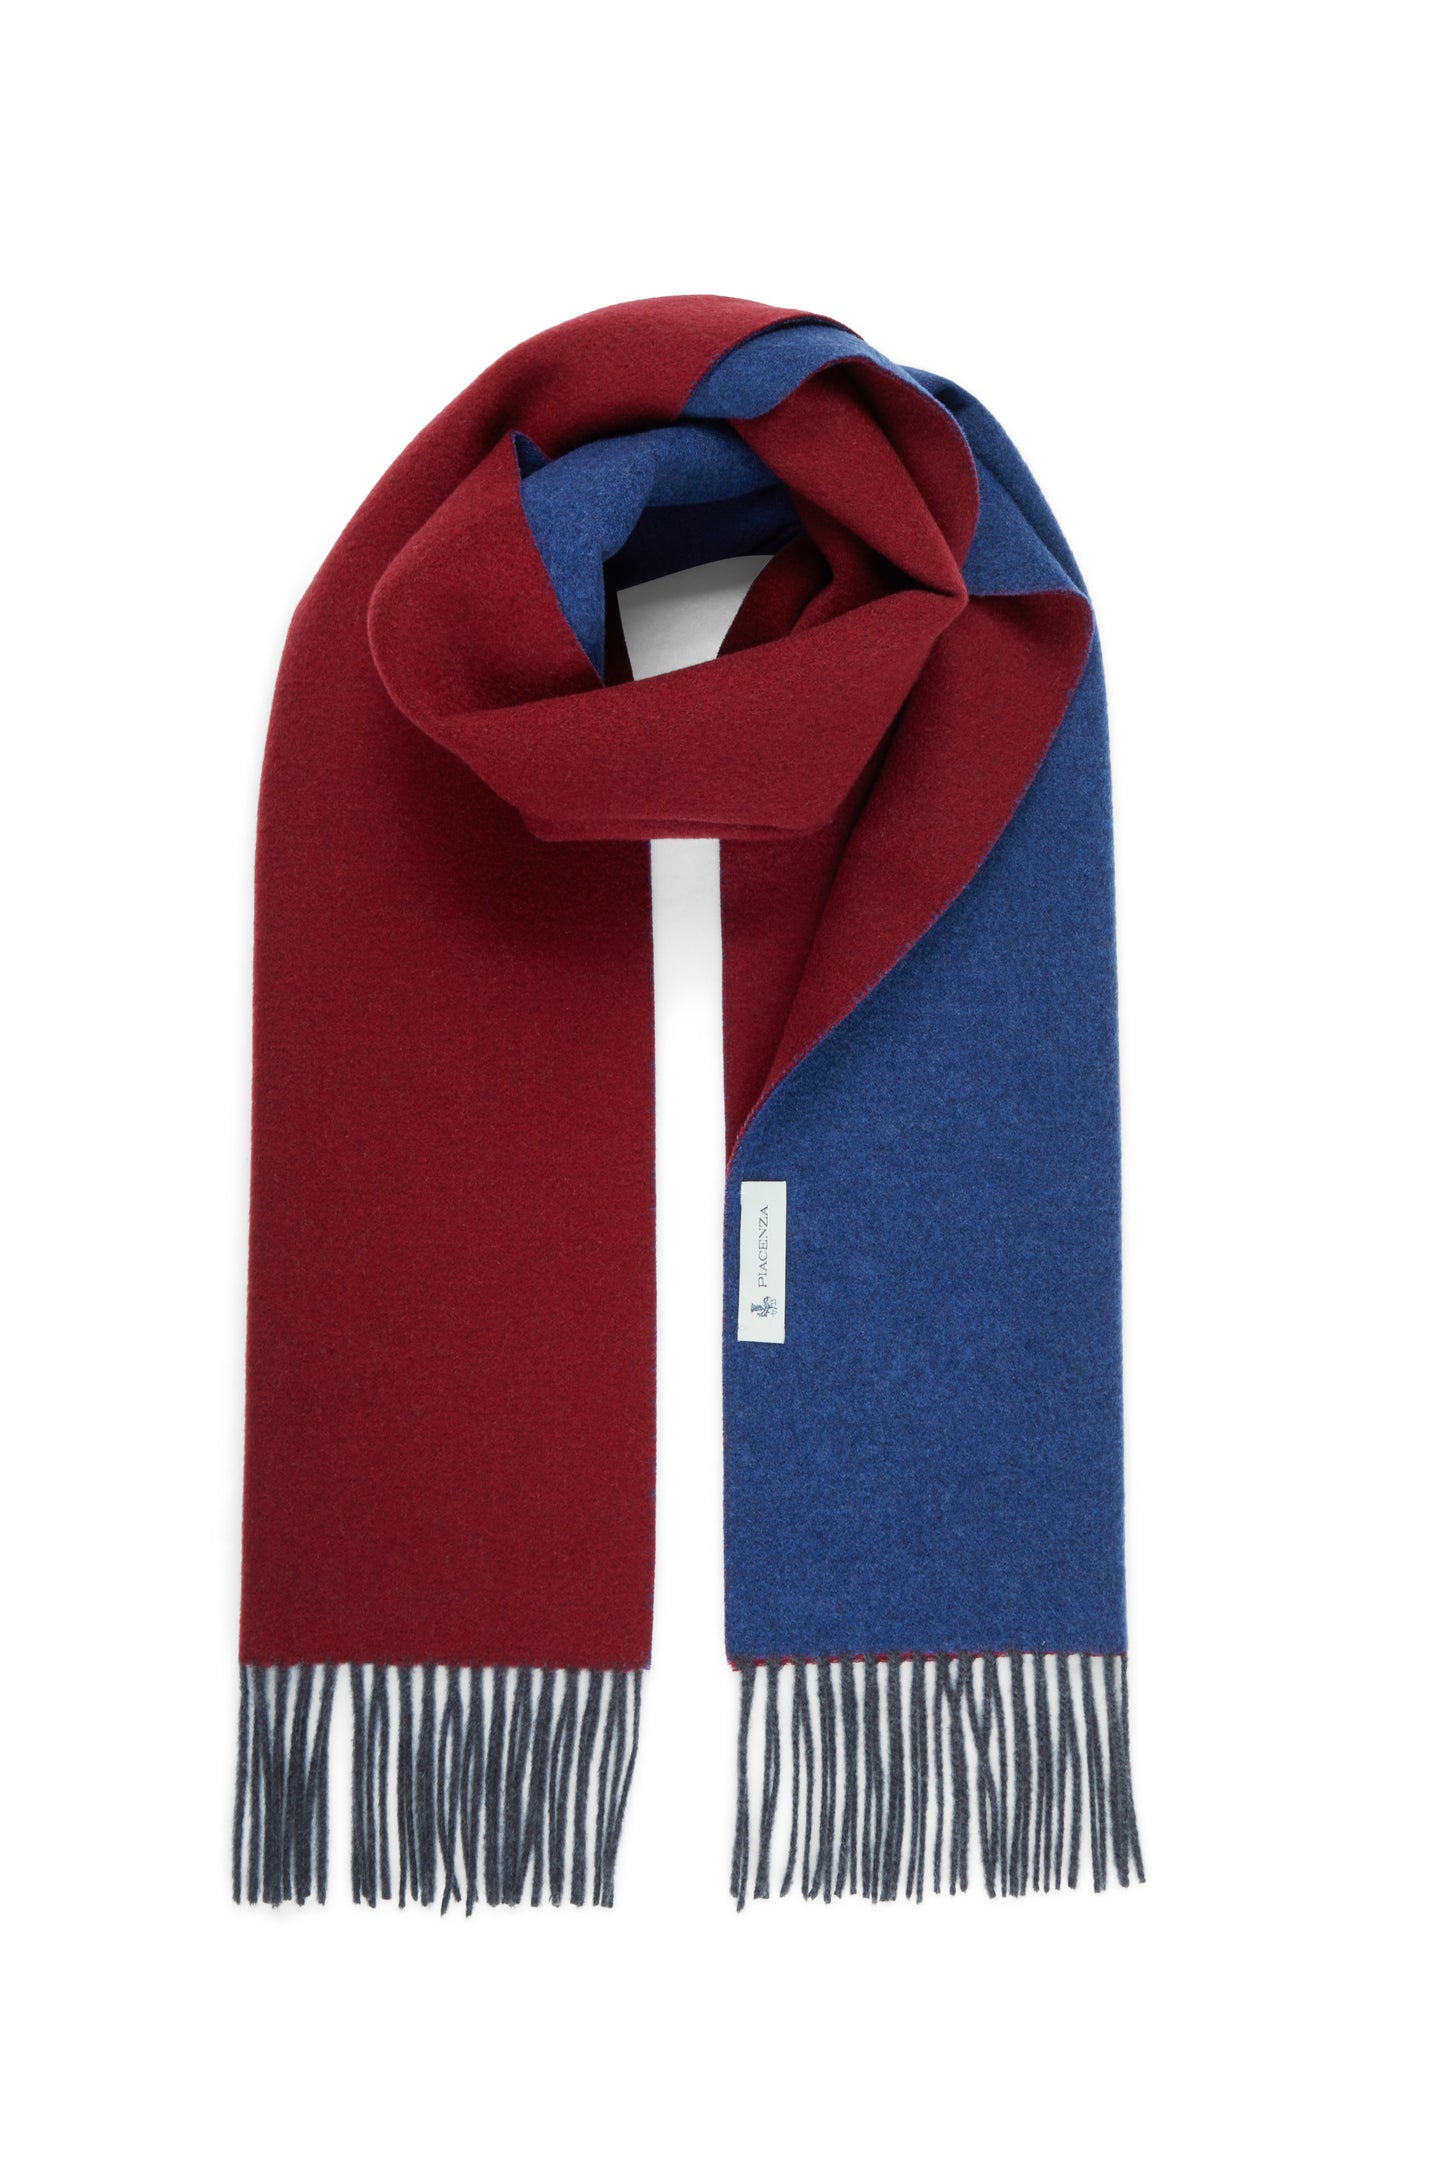 Red and blue Eternity scarf in pure Alashan Cashmere